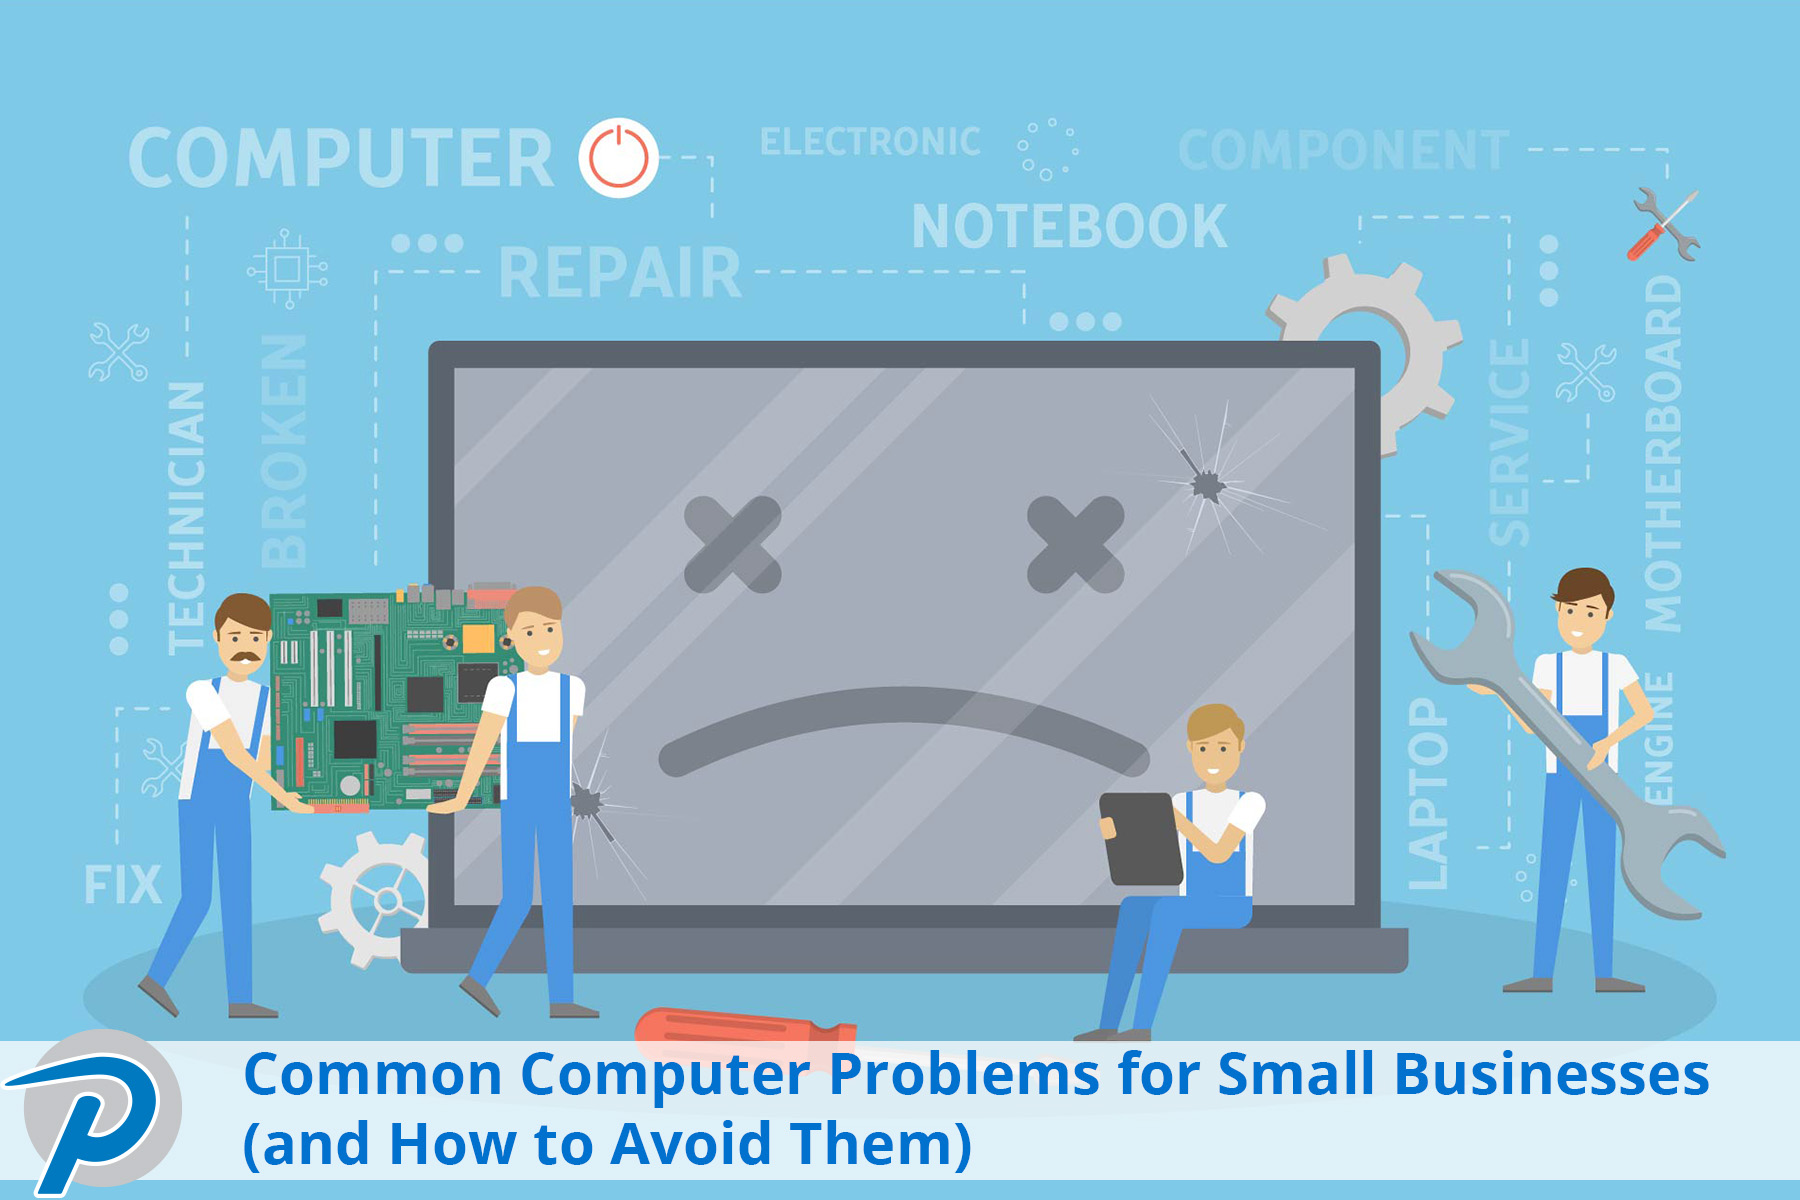 Common Computer Problems and How to Avoid Them